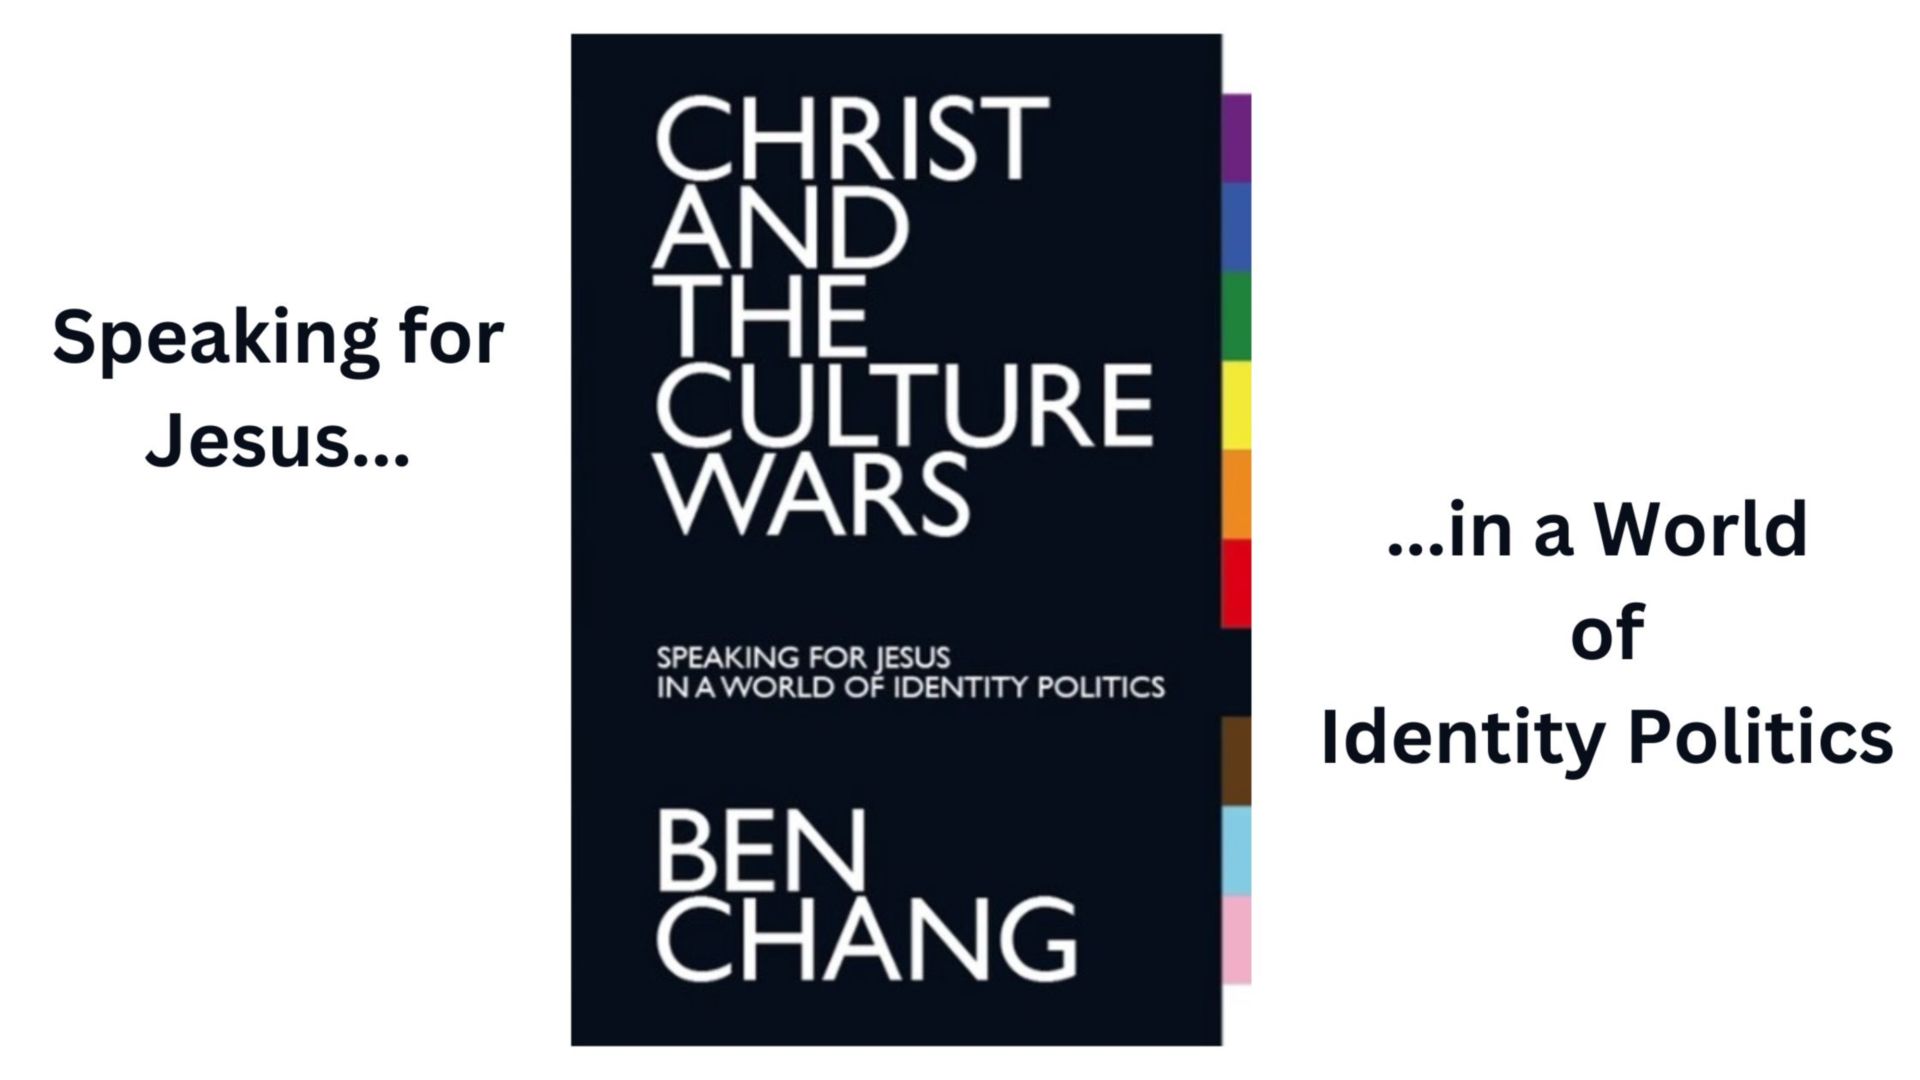 A review of the book 'Christ and the Culture Wars' by Ben Chang